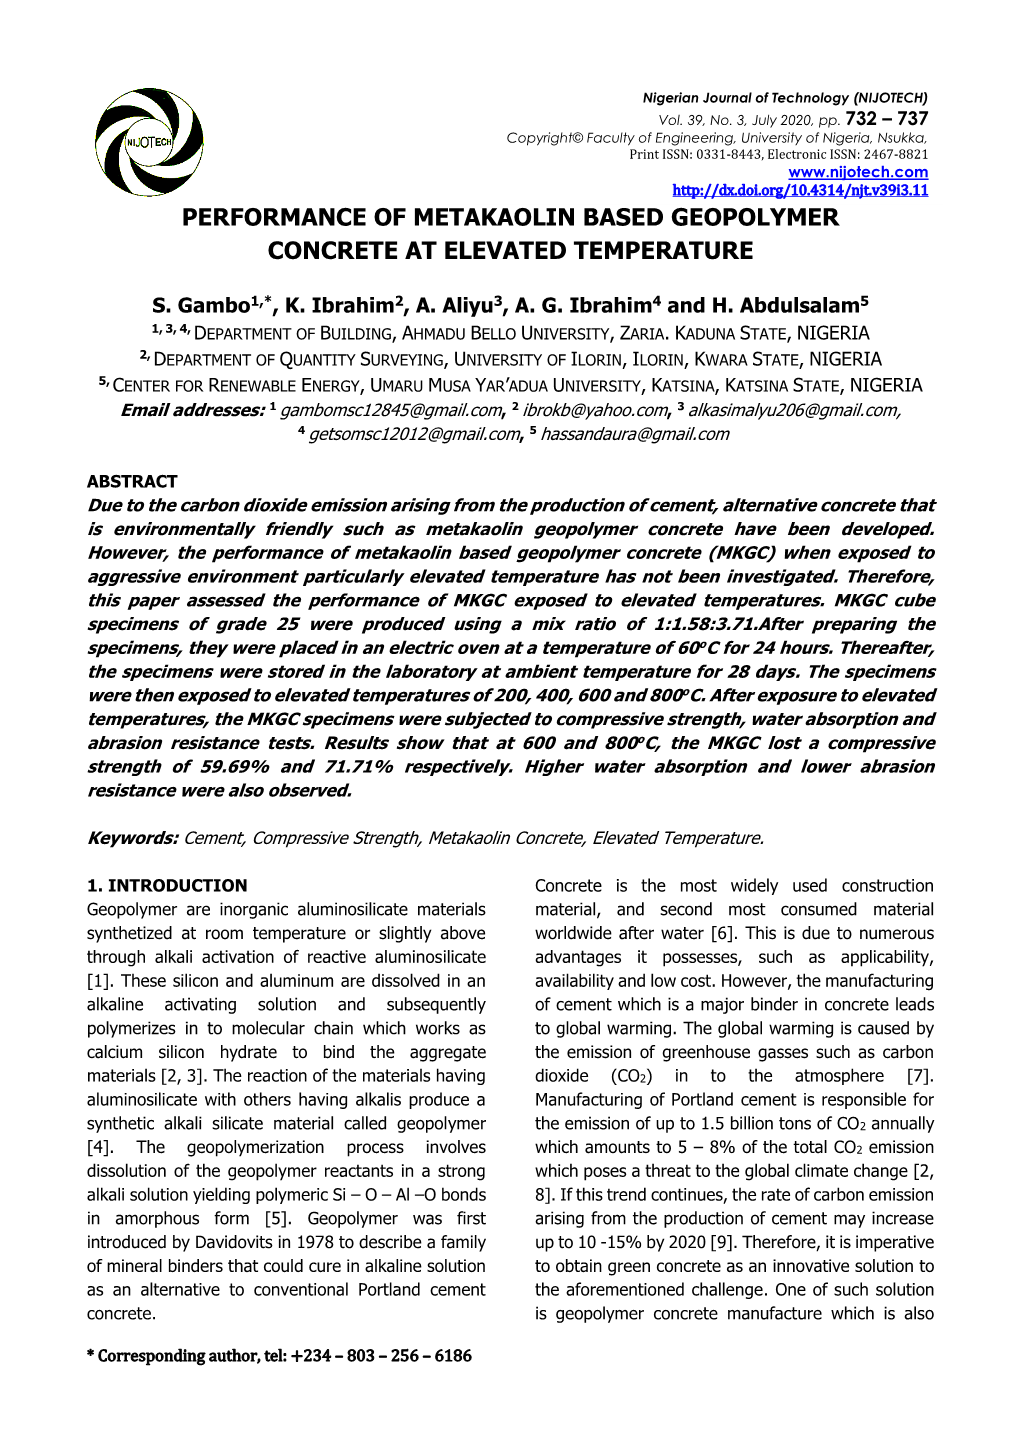 Performance of Metakaolin Based Geopolymer Concrete at Elevated Temperature